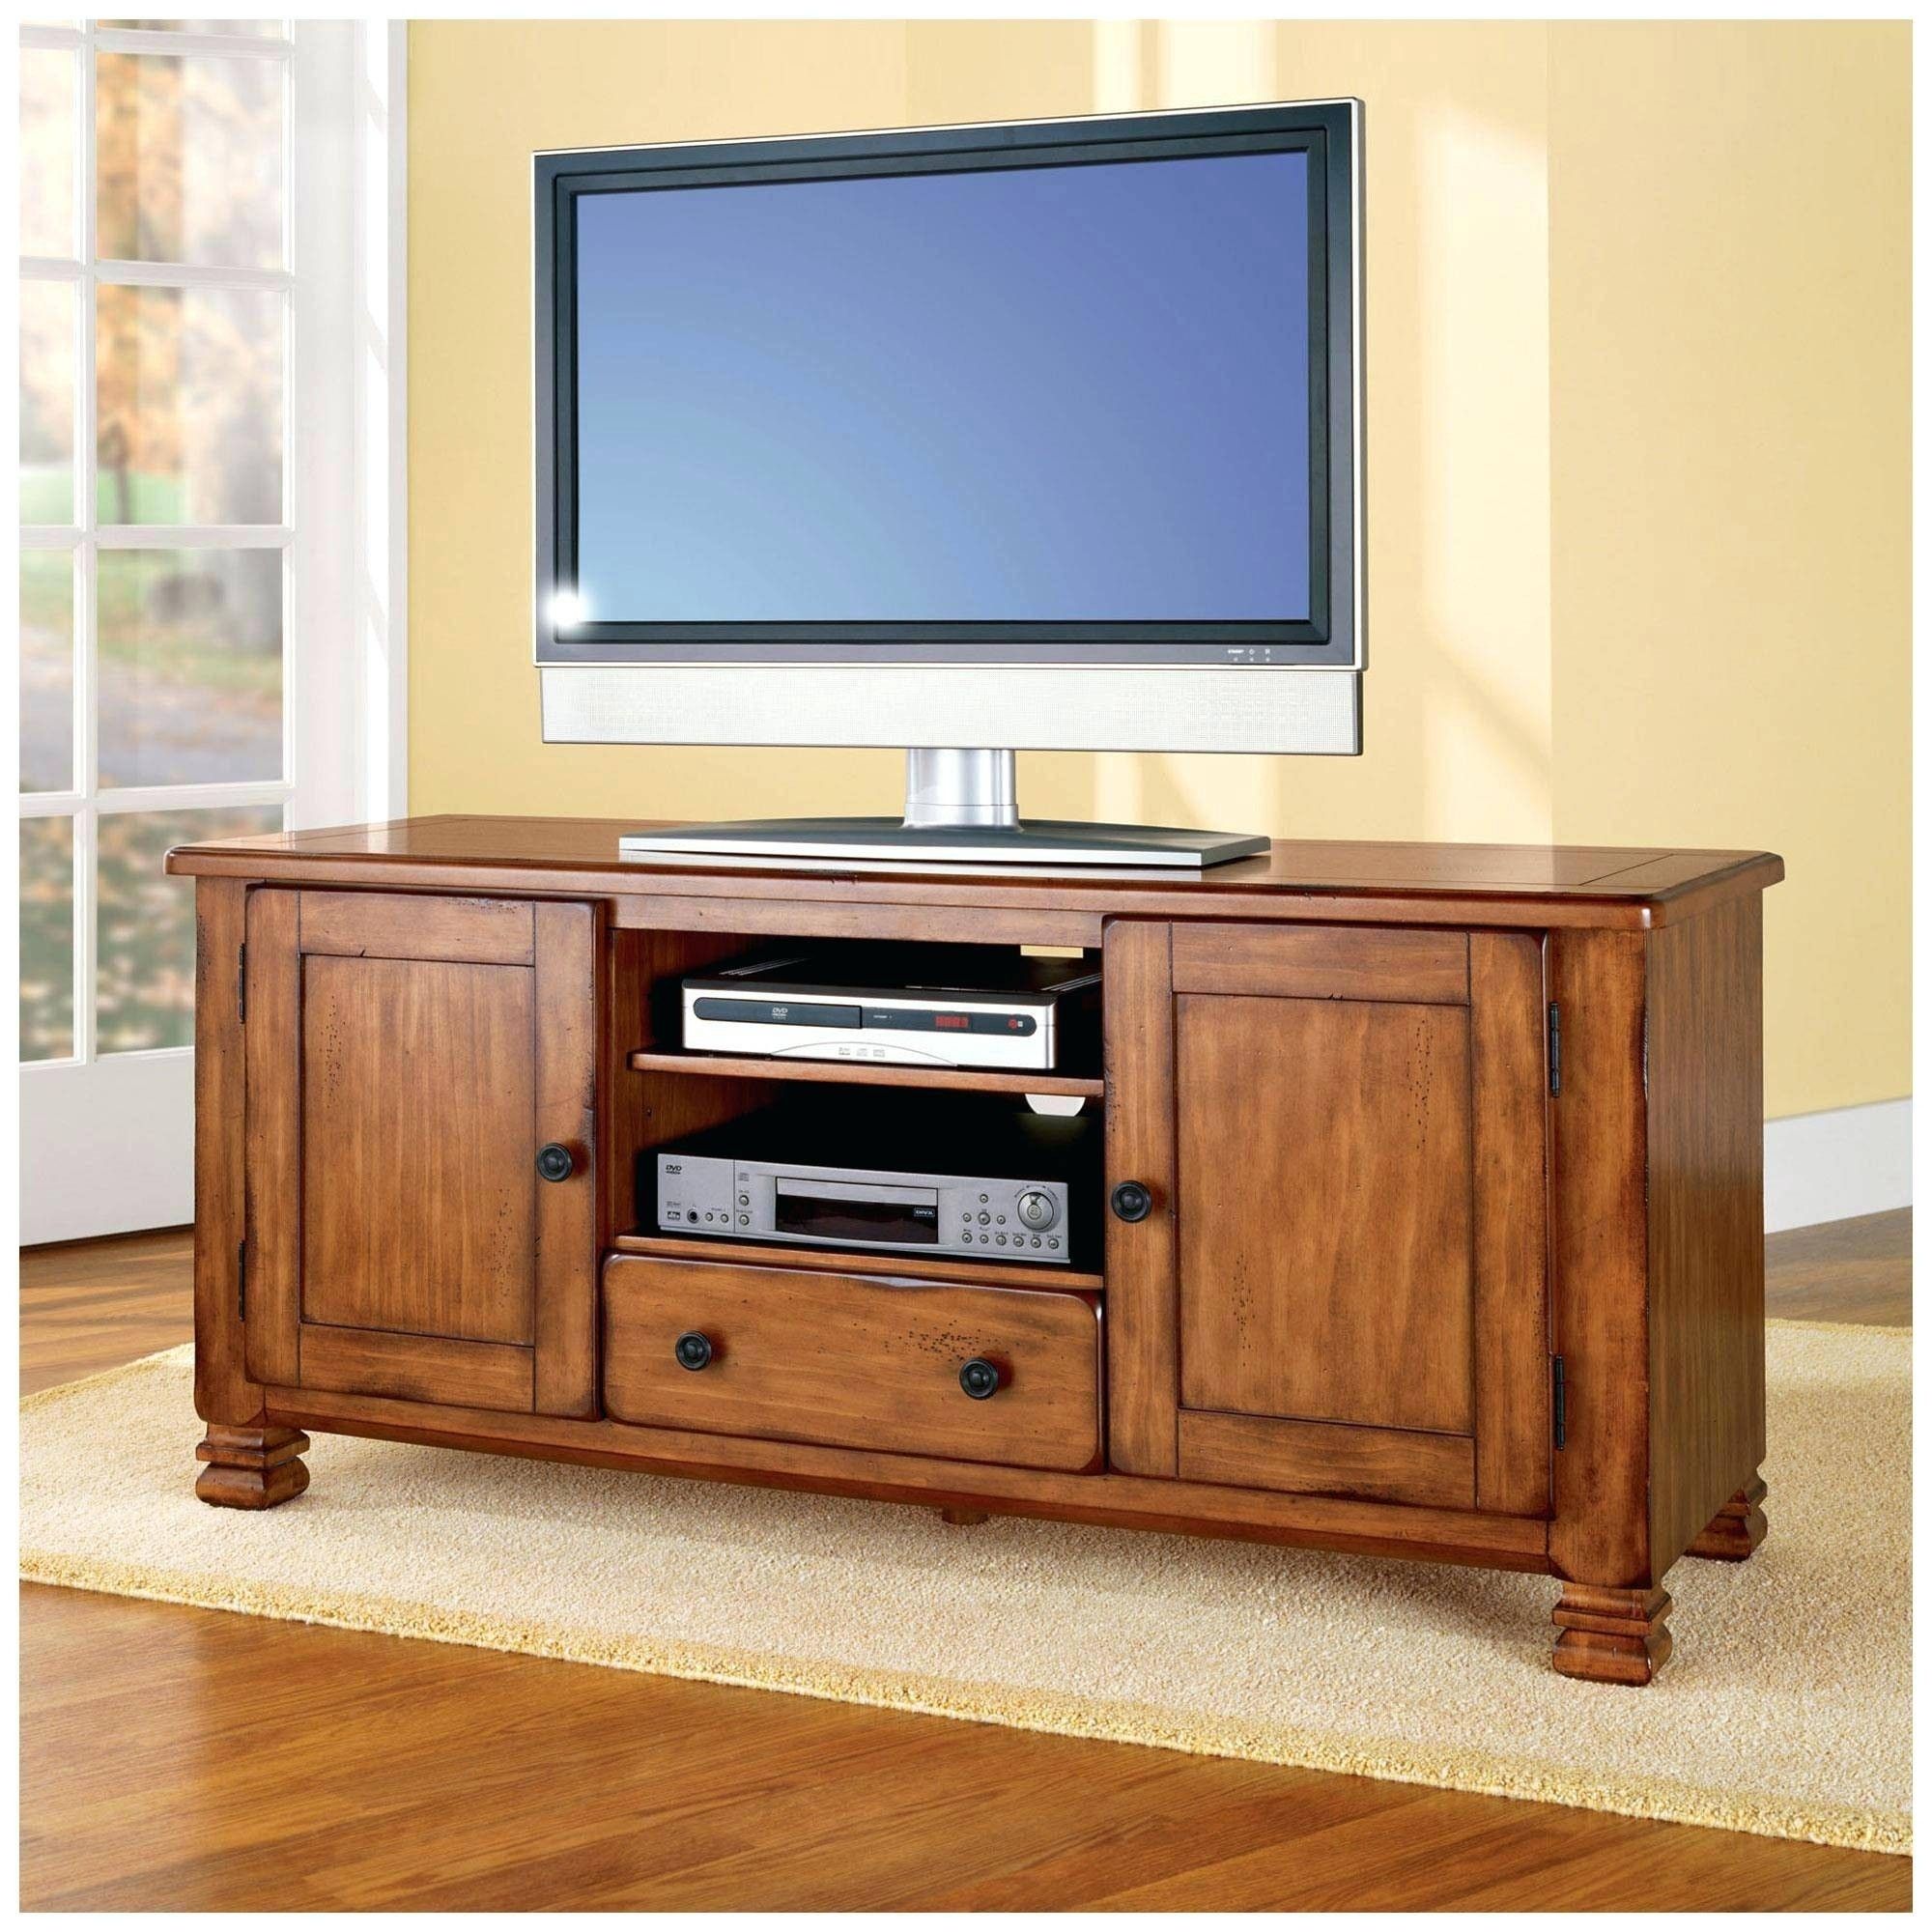 Oak Corner Tv Stands For Flat Screens – Ideas On Foter Intended For Oak Tv Stands For Flat Screen (Photo 5 of 15)